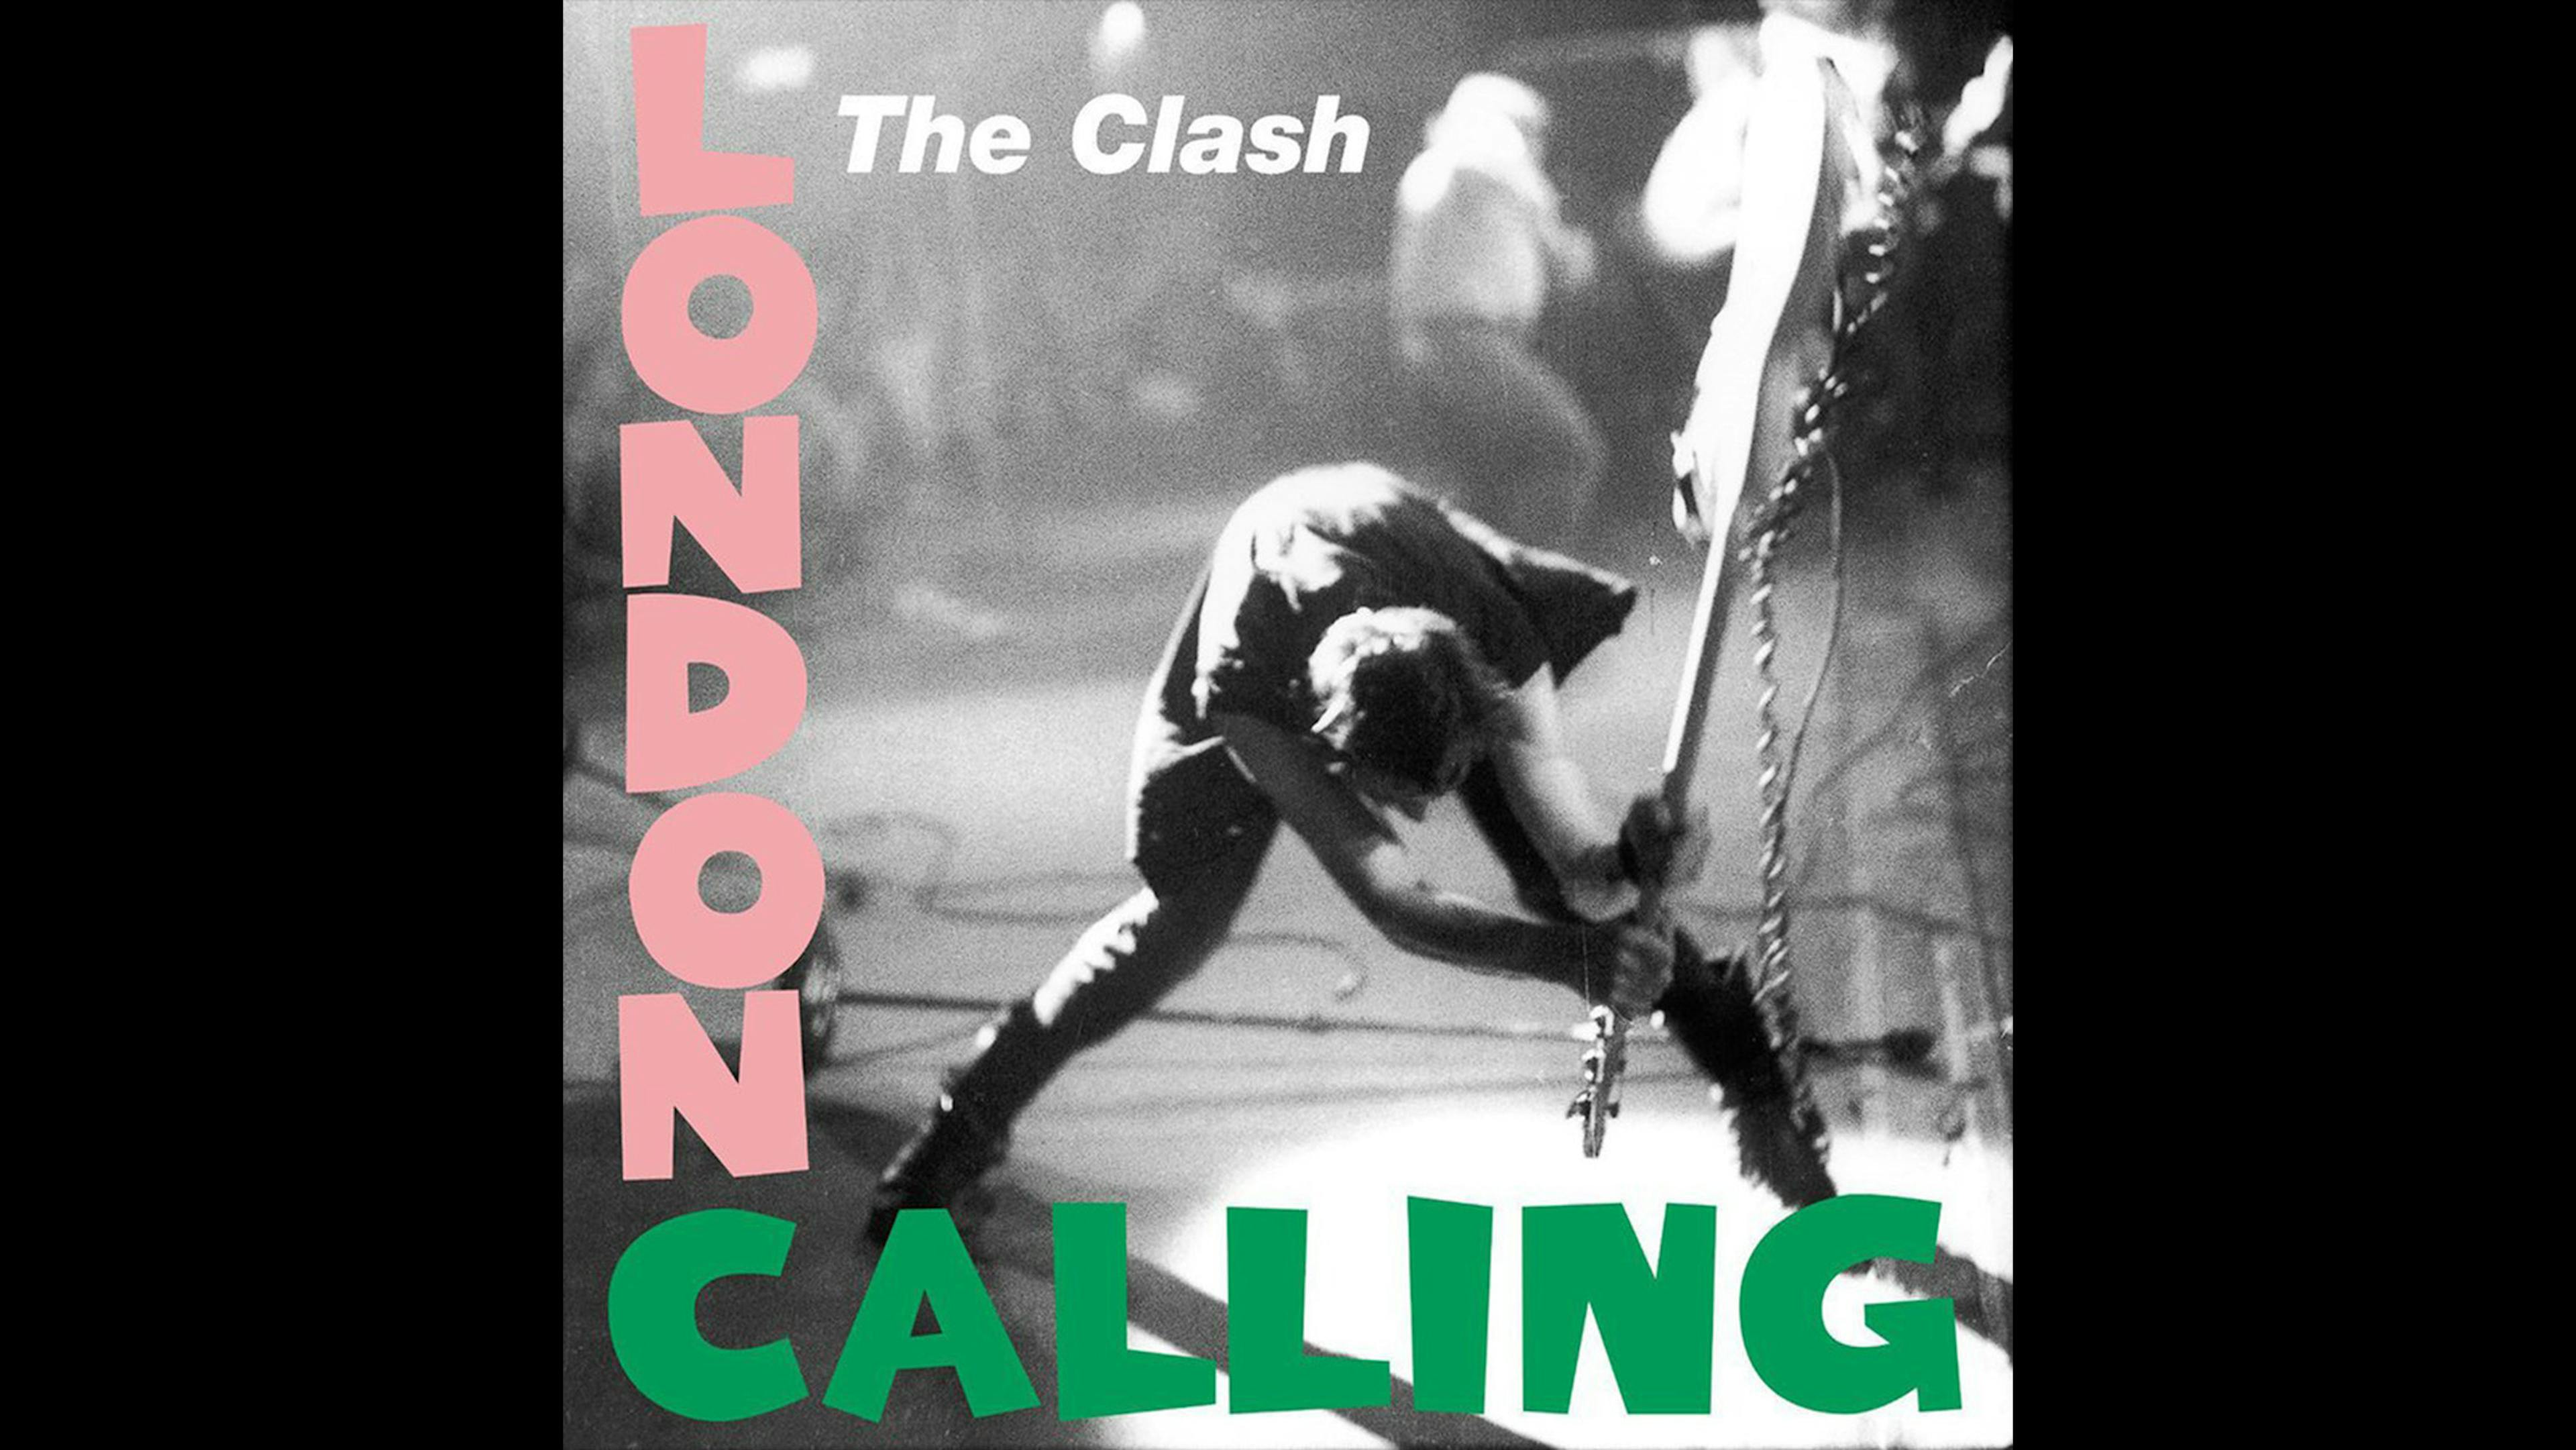 Always one step ahead of the rest of the British scene, The Clash excelled themselves further and confirmed their legend on third album, London Calling. While all around them missed the point and used punk as a mere vehicle for hyper, angry songs, the Clash embraced its freedom of expression to explore new sounds and avenues. Refining their rage into art, across a stylistically sprawling double album filled with timeless tunes, Joe Strummer and co. achieved a caliber of songwriting and craft that’s truthfully rarely been matched in the genre, before or since.